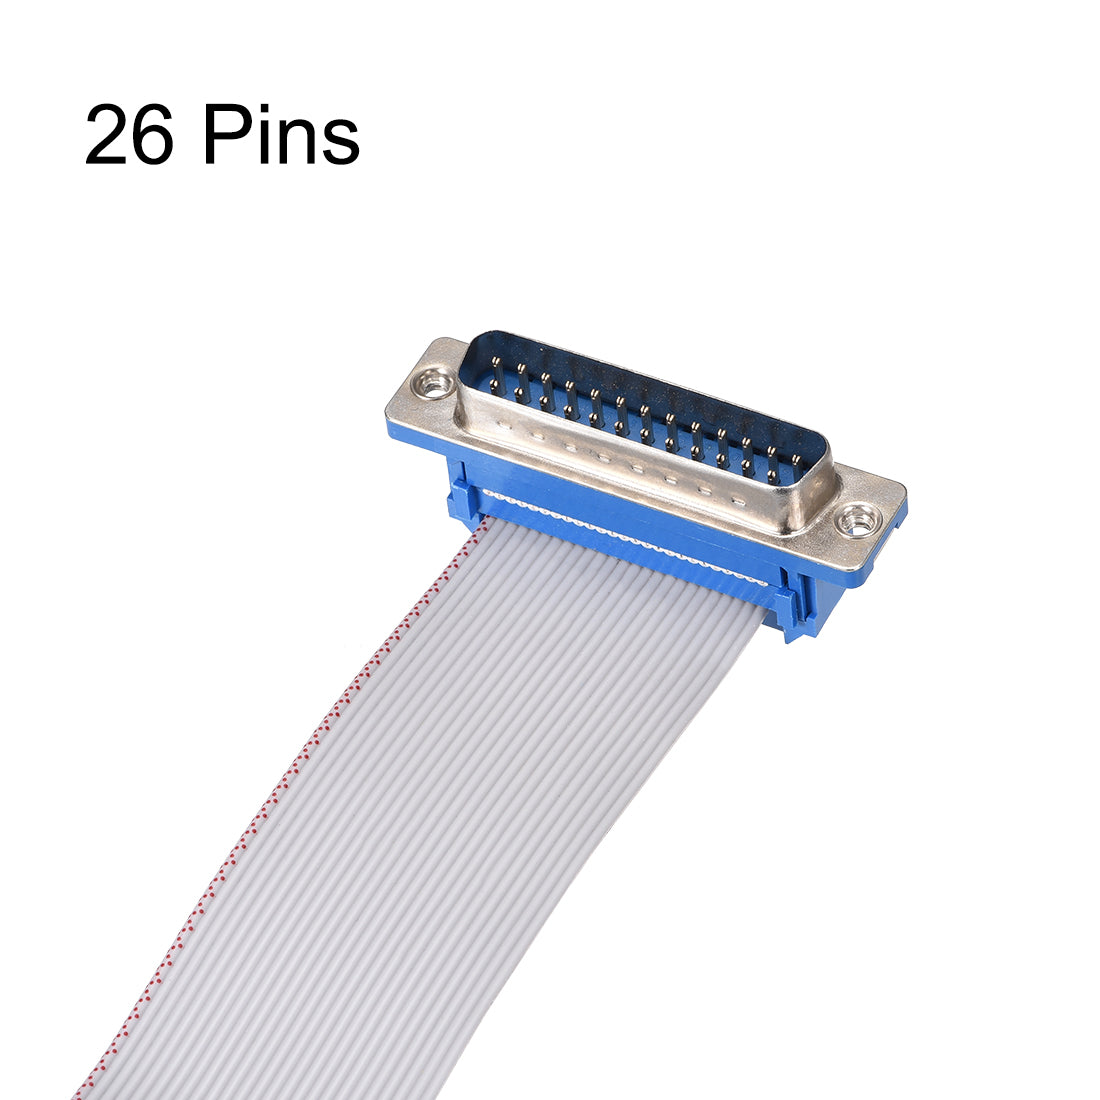 uxcell Uxcell IDC Wire Flat Ribbon Cable DB25 Male to FC-26 Female Connector 2.54mm Pitch 20cm Length , 2pcs